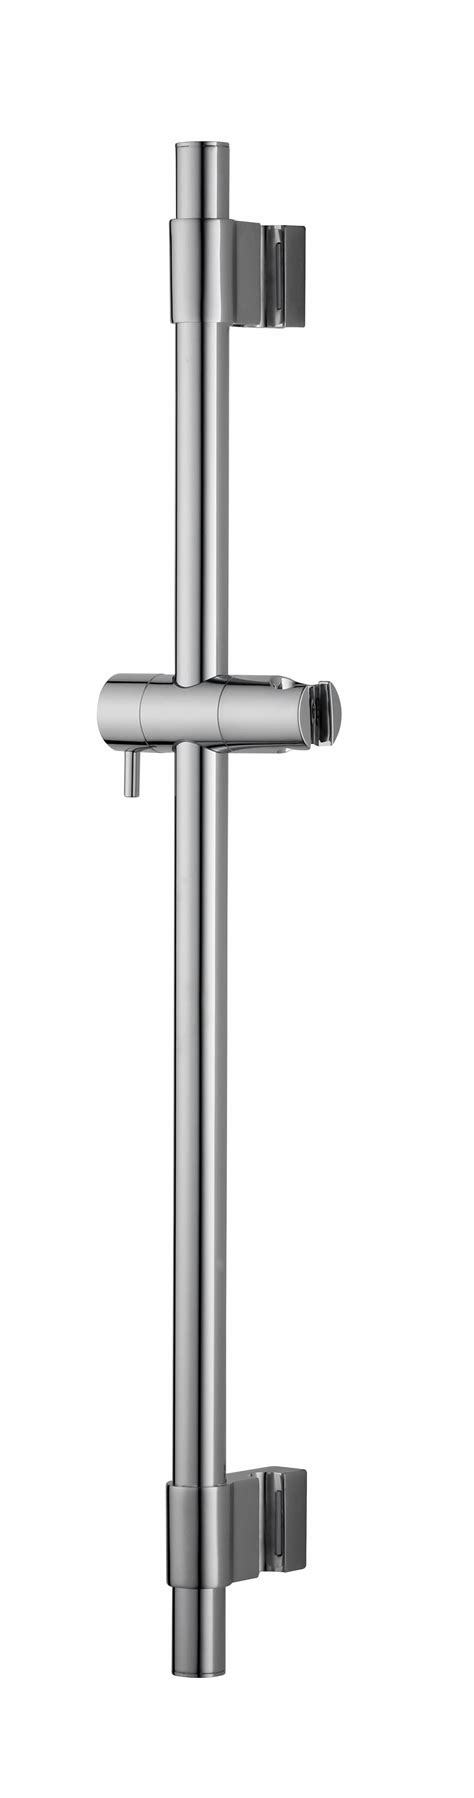 Bathroom Stainless Steel Tube Shower Sliding Bar Bathroom Dia 22 25mm With Wall Bracket And